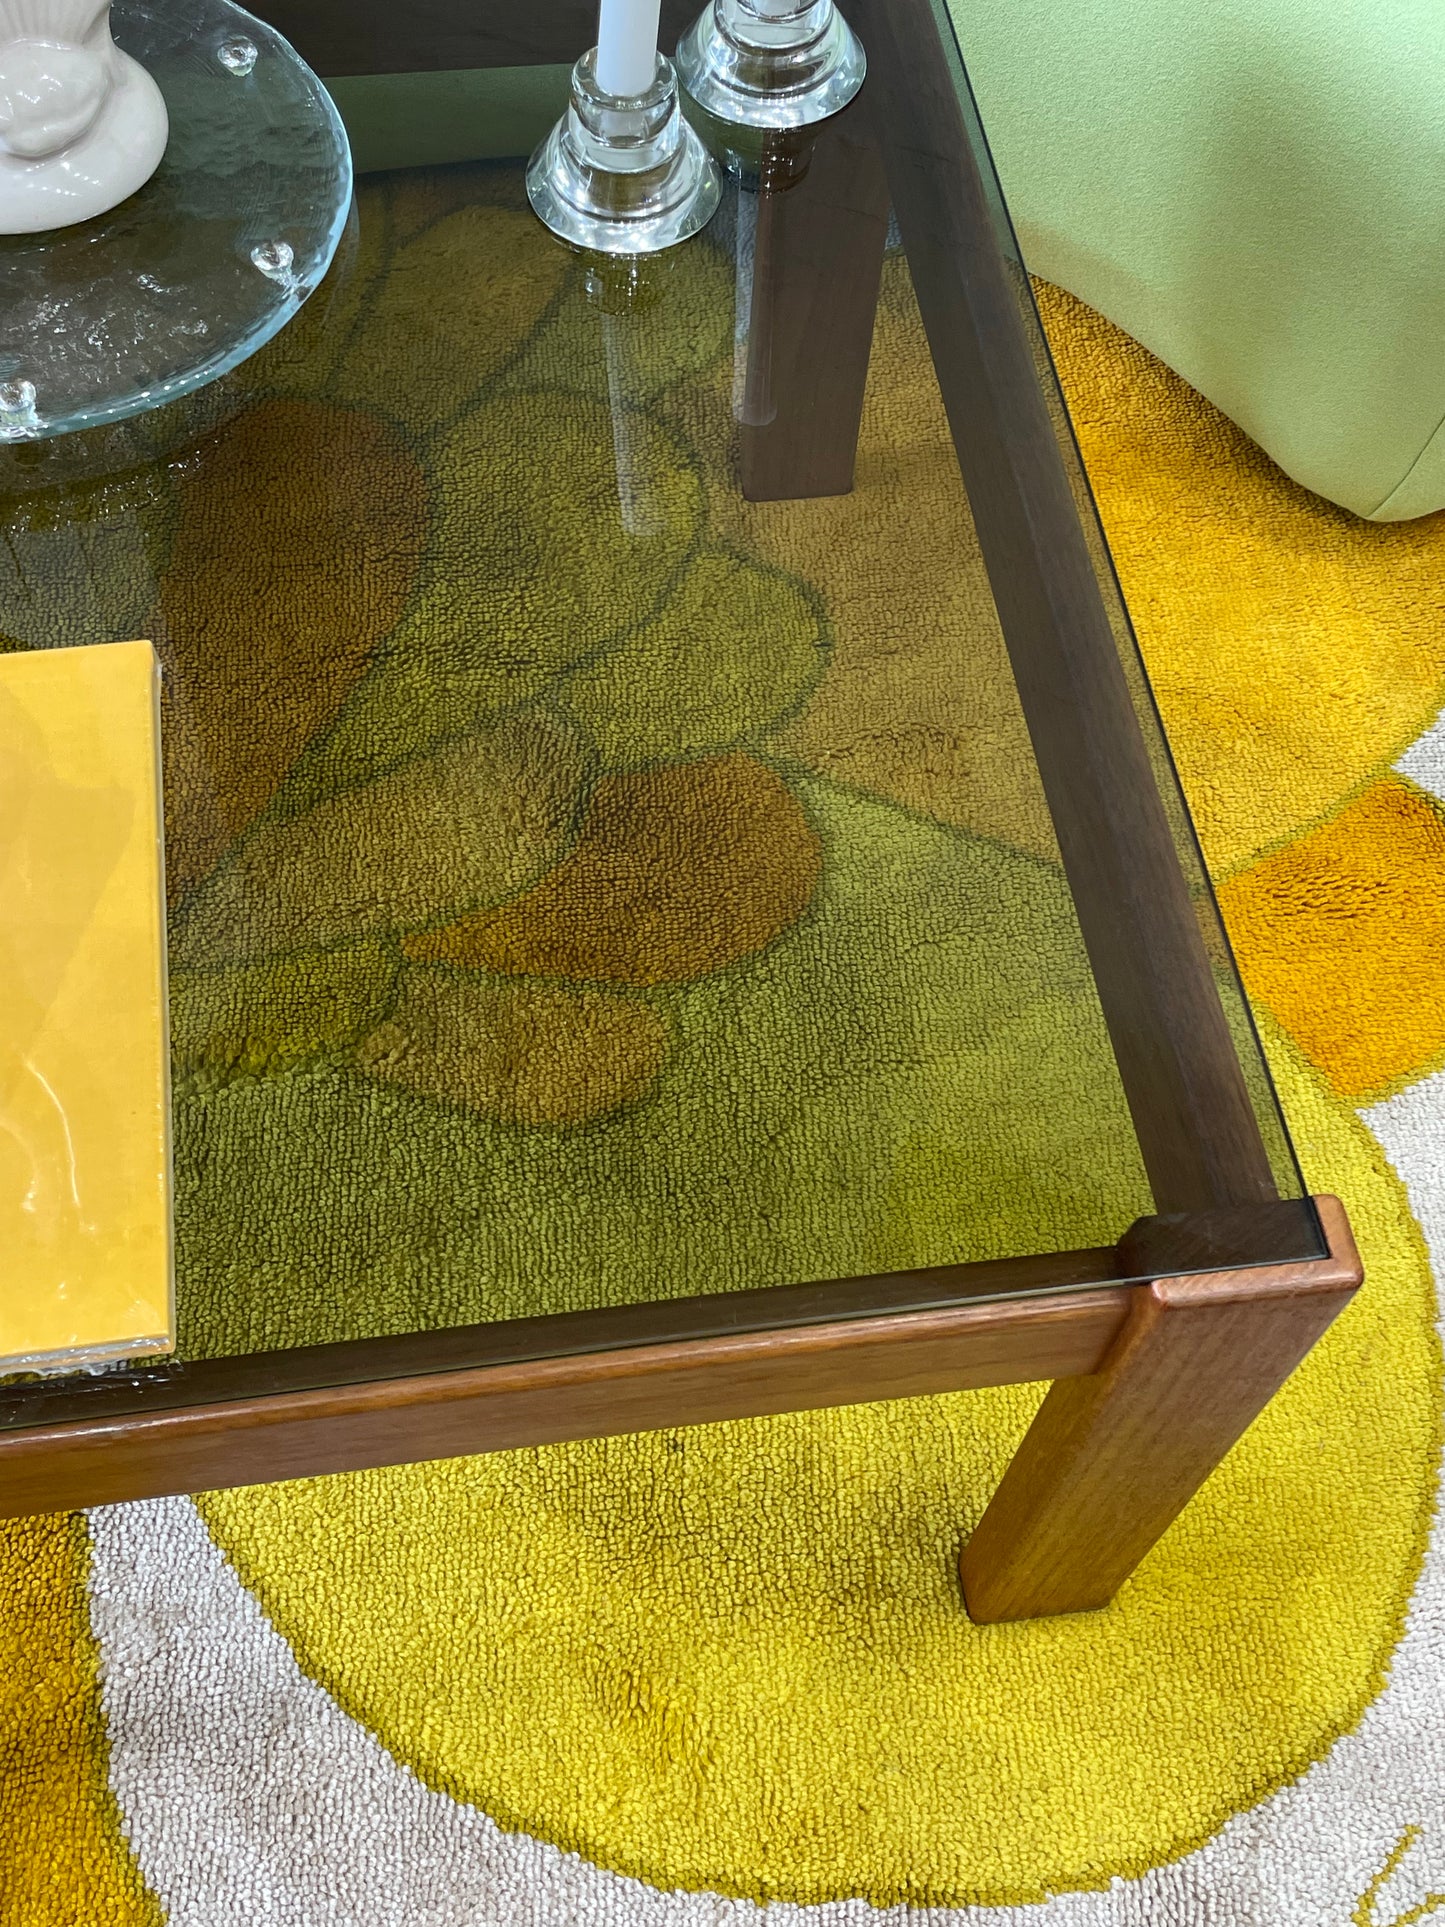 Noblett Teak and Smoked Glass Coffee Table